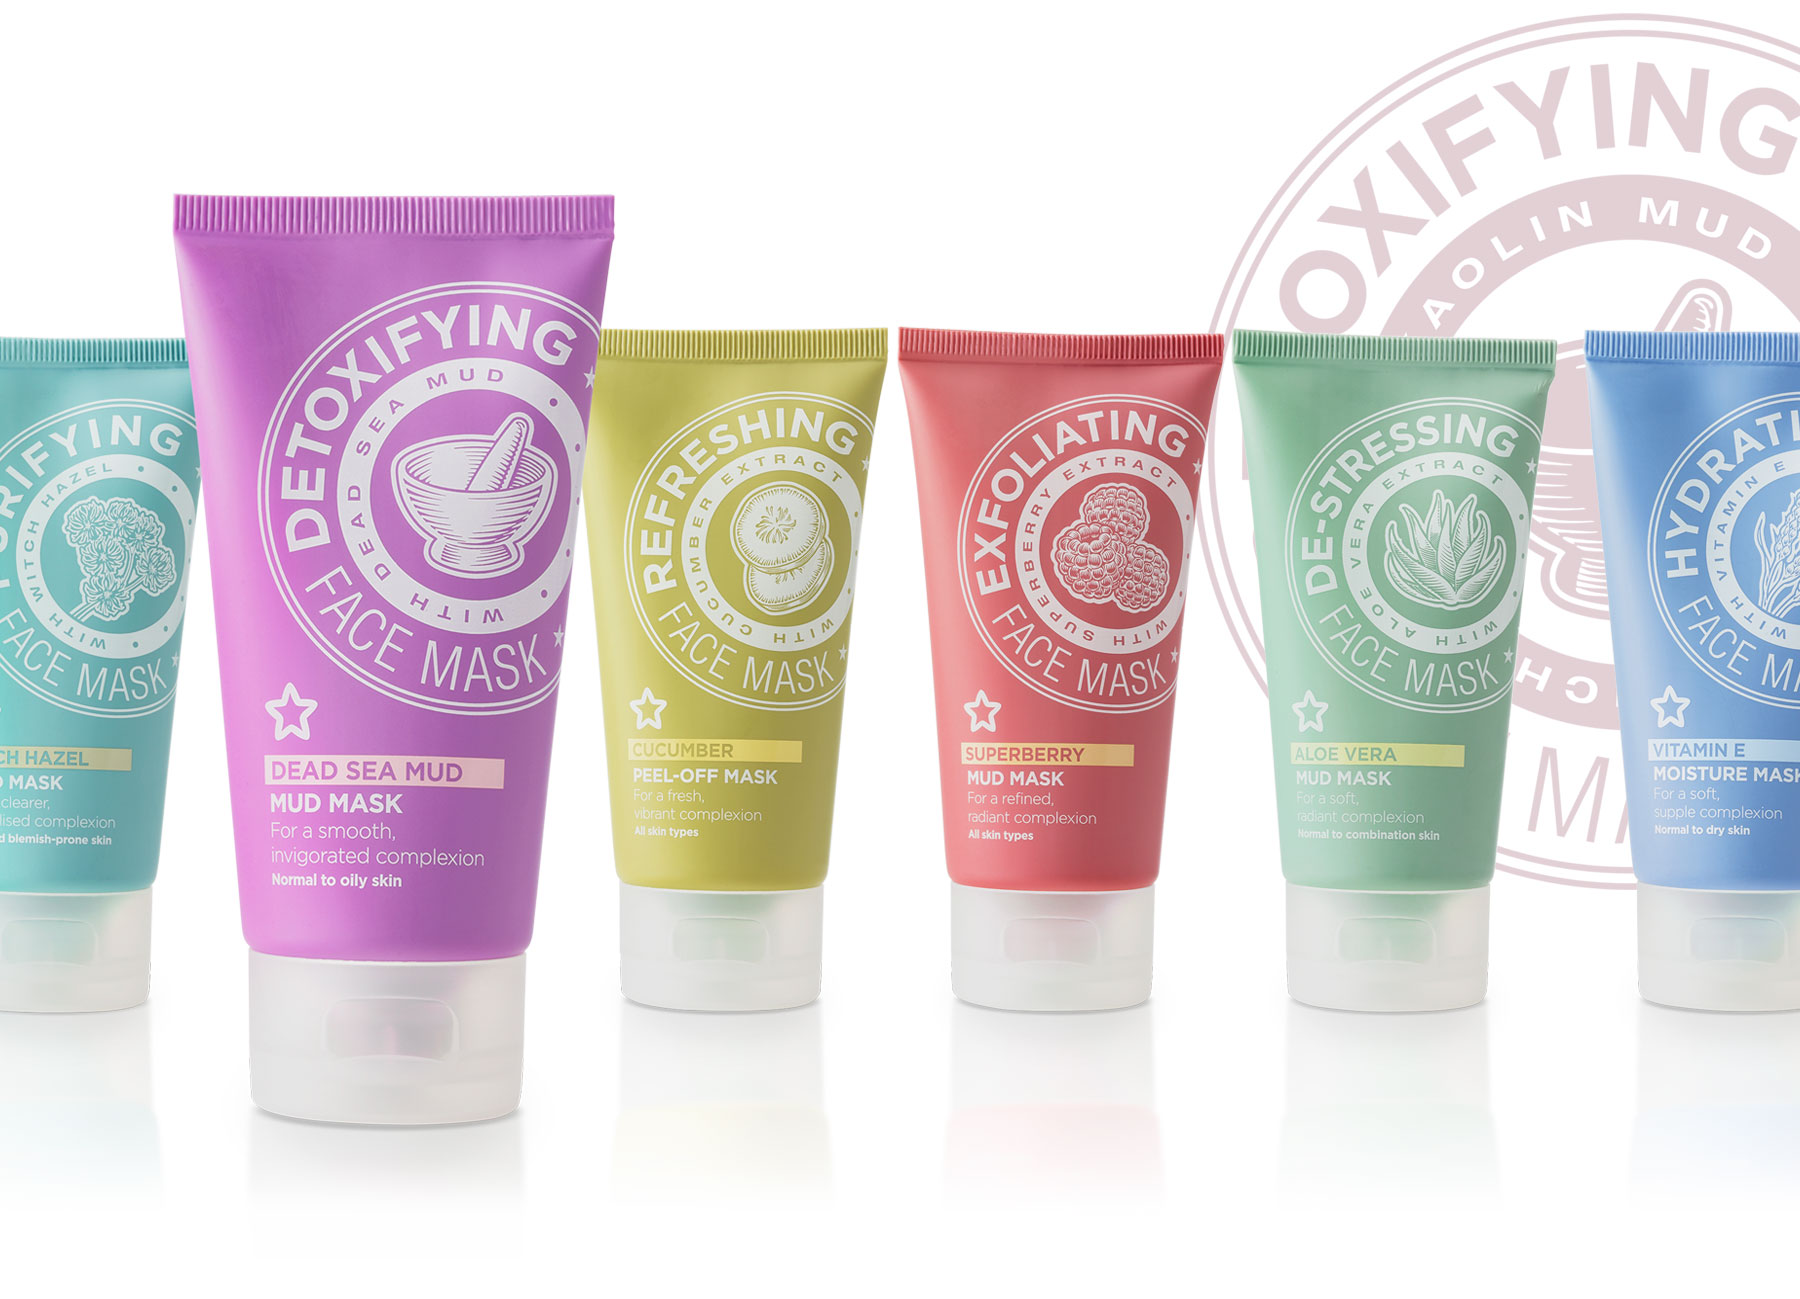 Superdrug Face Masks products lined up on white with a watermarked roundel in the background design by Biles Hendry